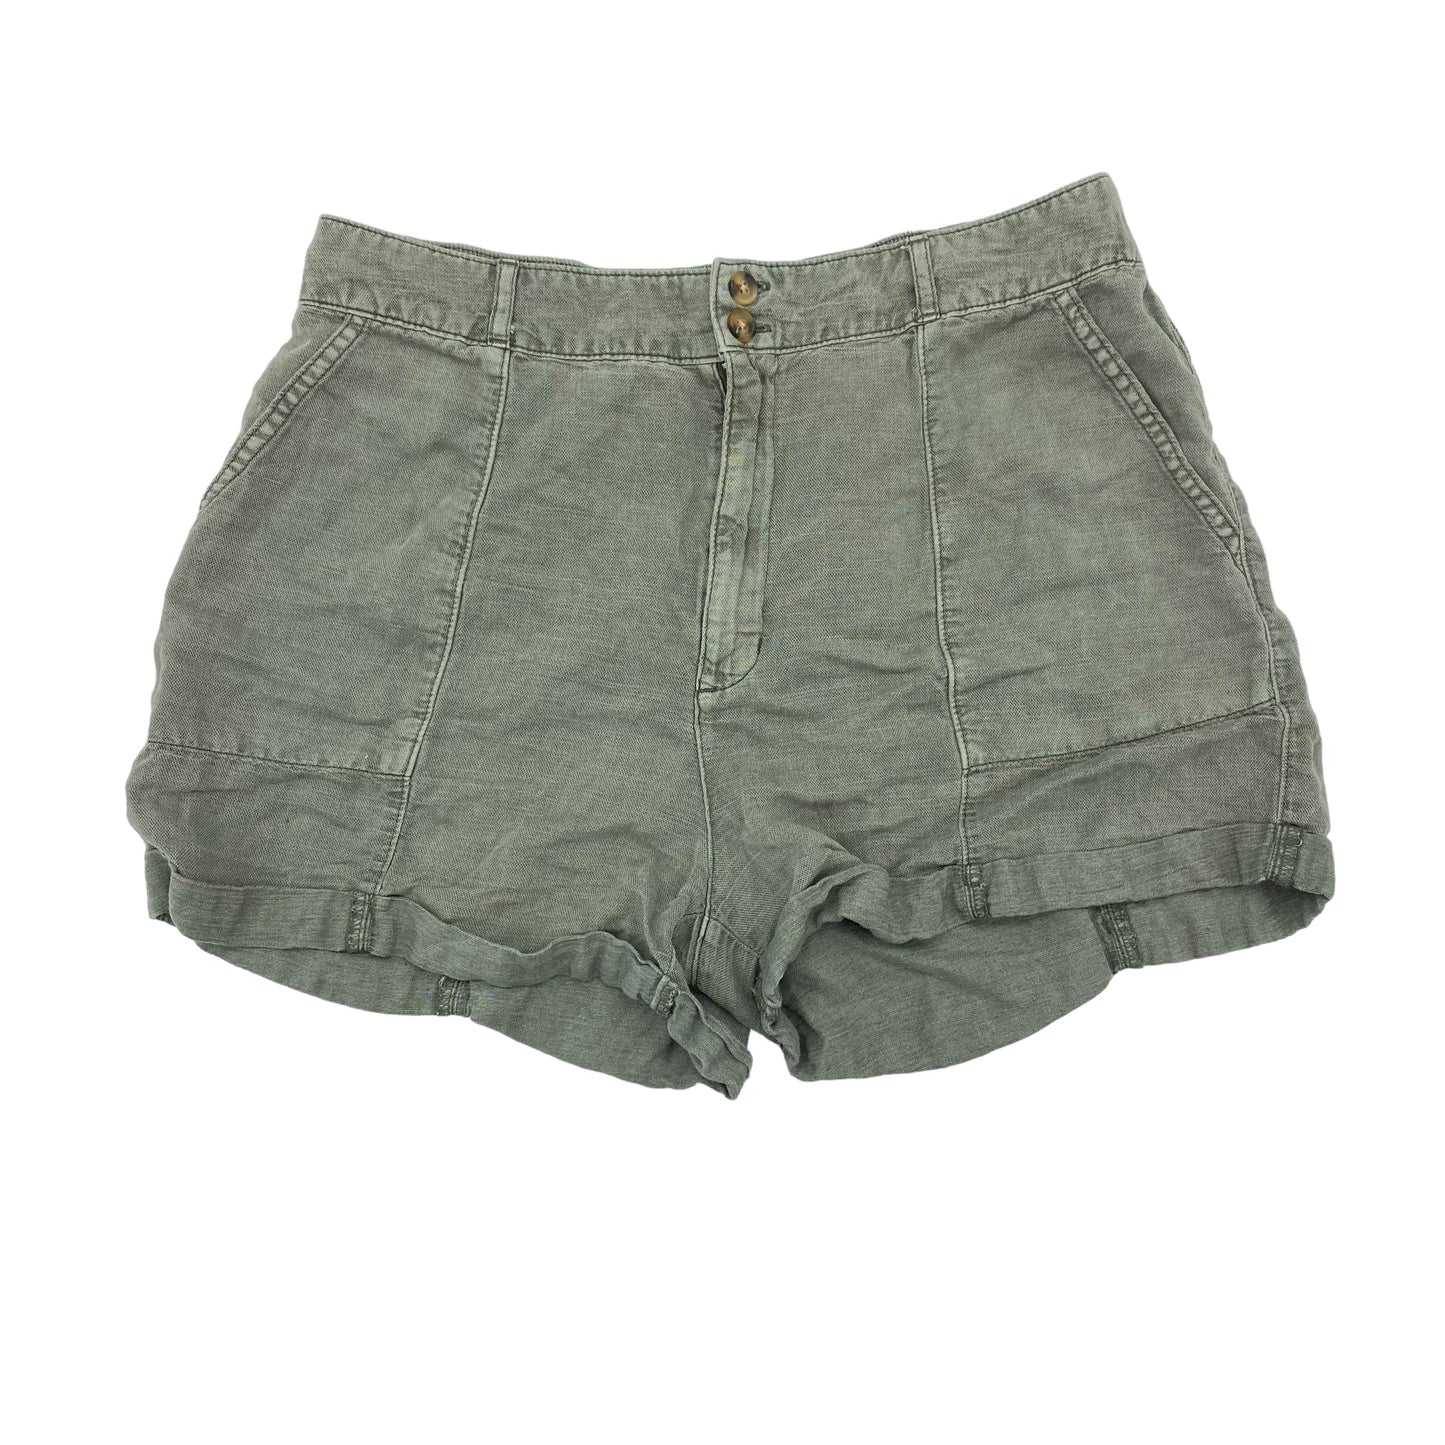 GREEN JOIE SHORTS, Size 12